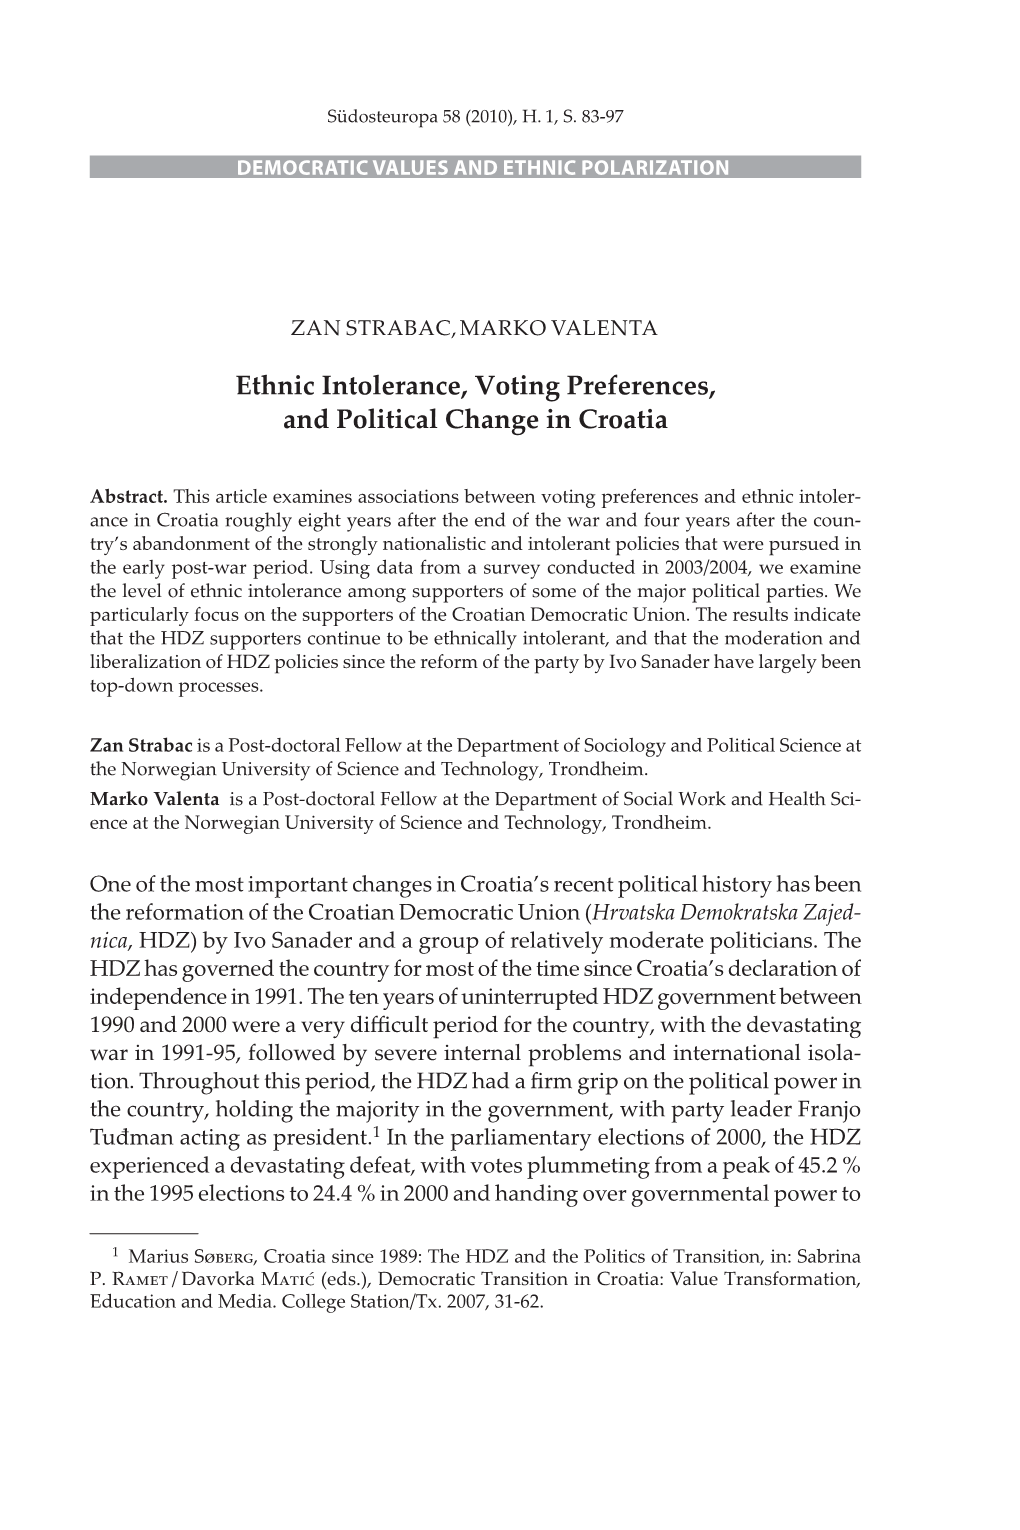 Ethnic Intolerance, Voting Preferences, and Political Change in Croatia